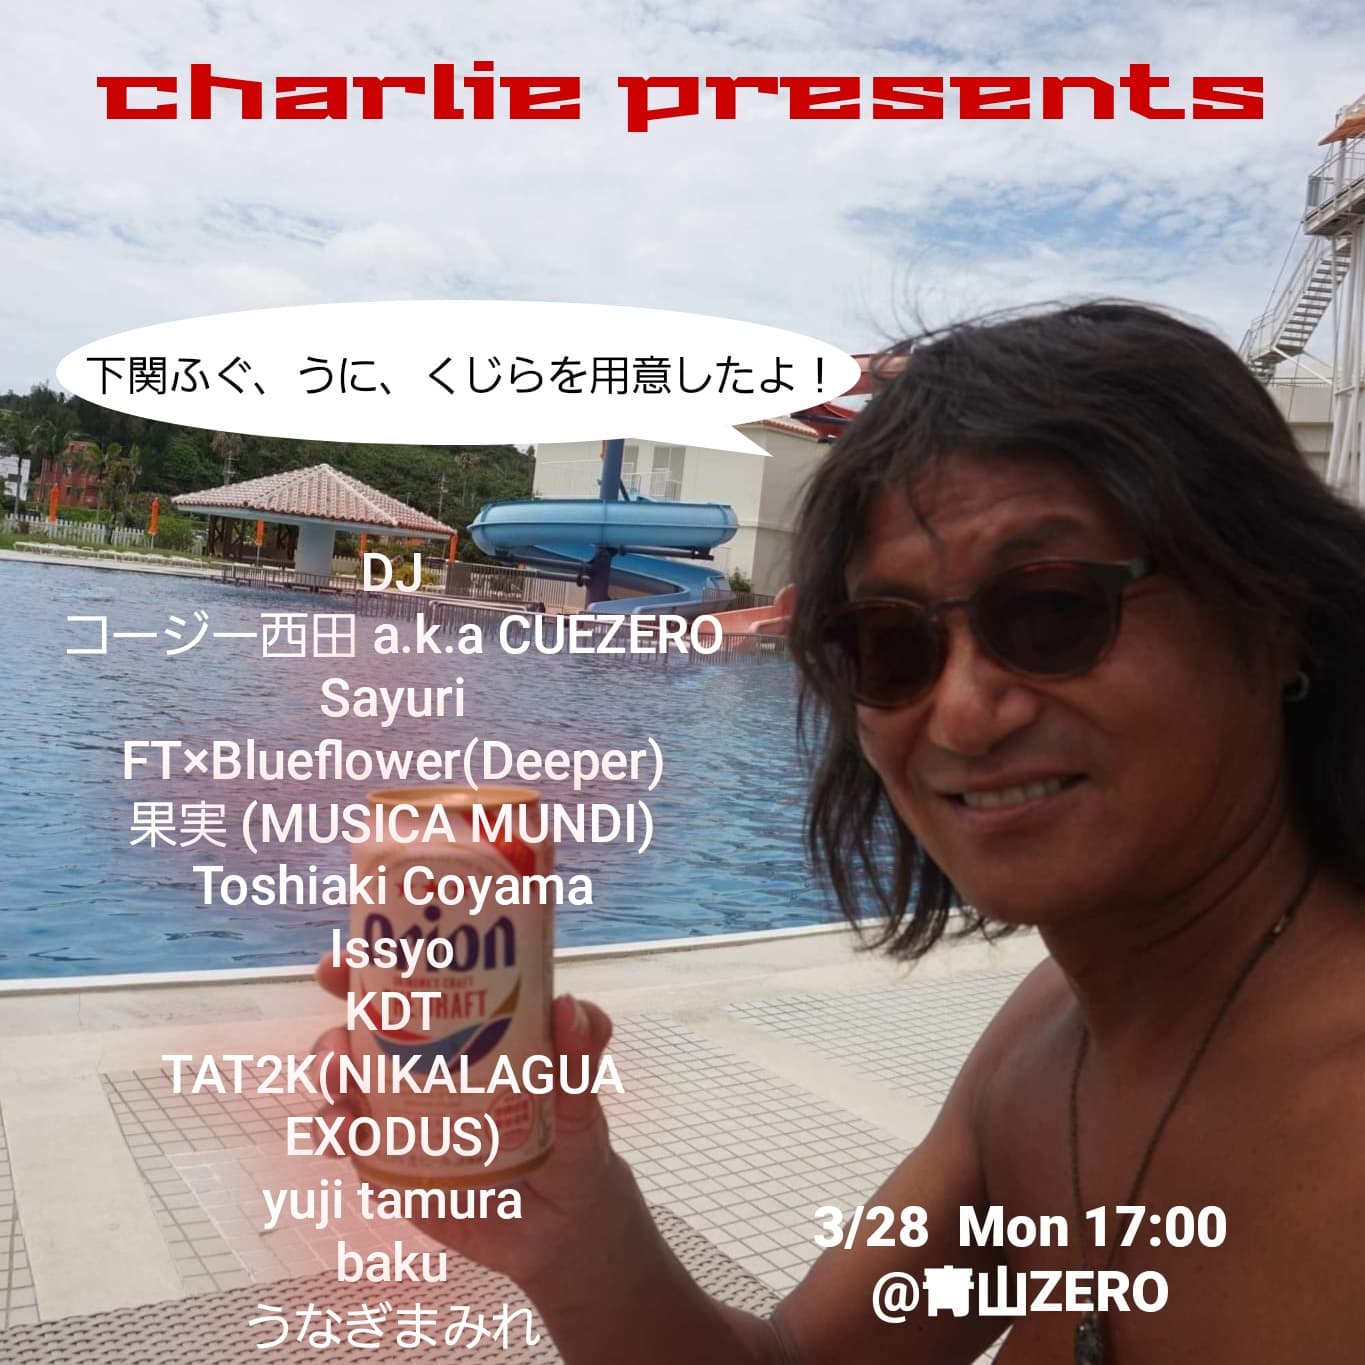 charlie presents　”チャーリーさん61st special !!”